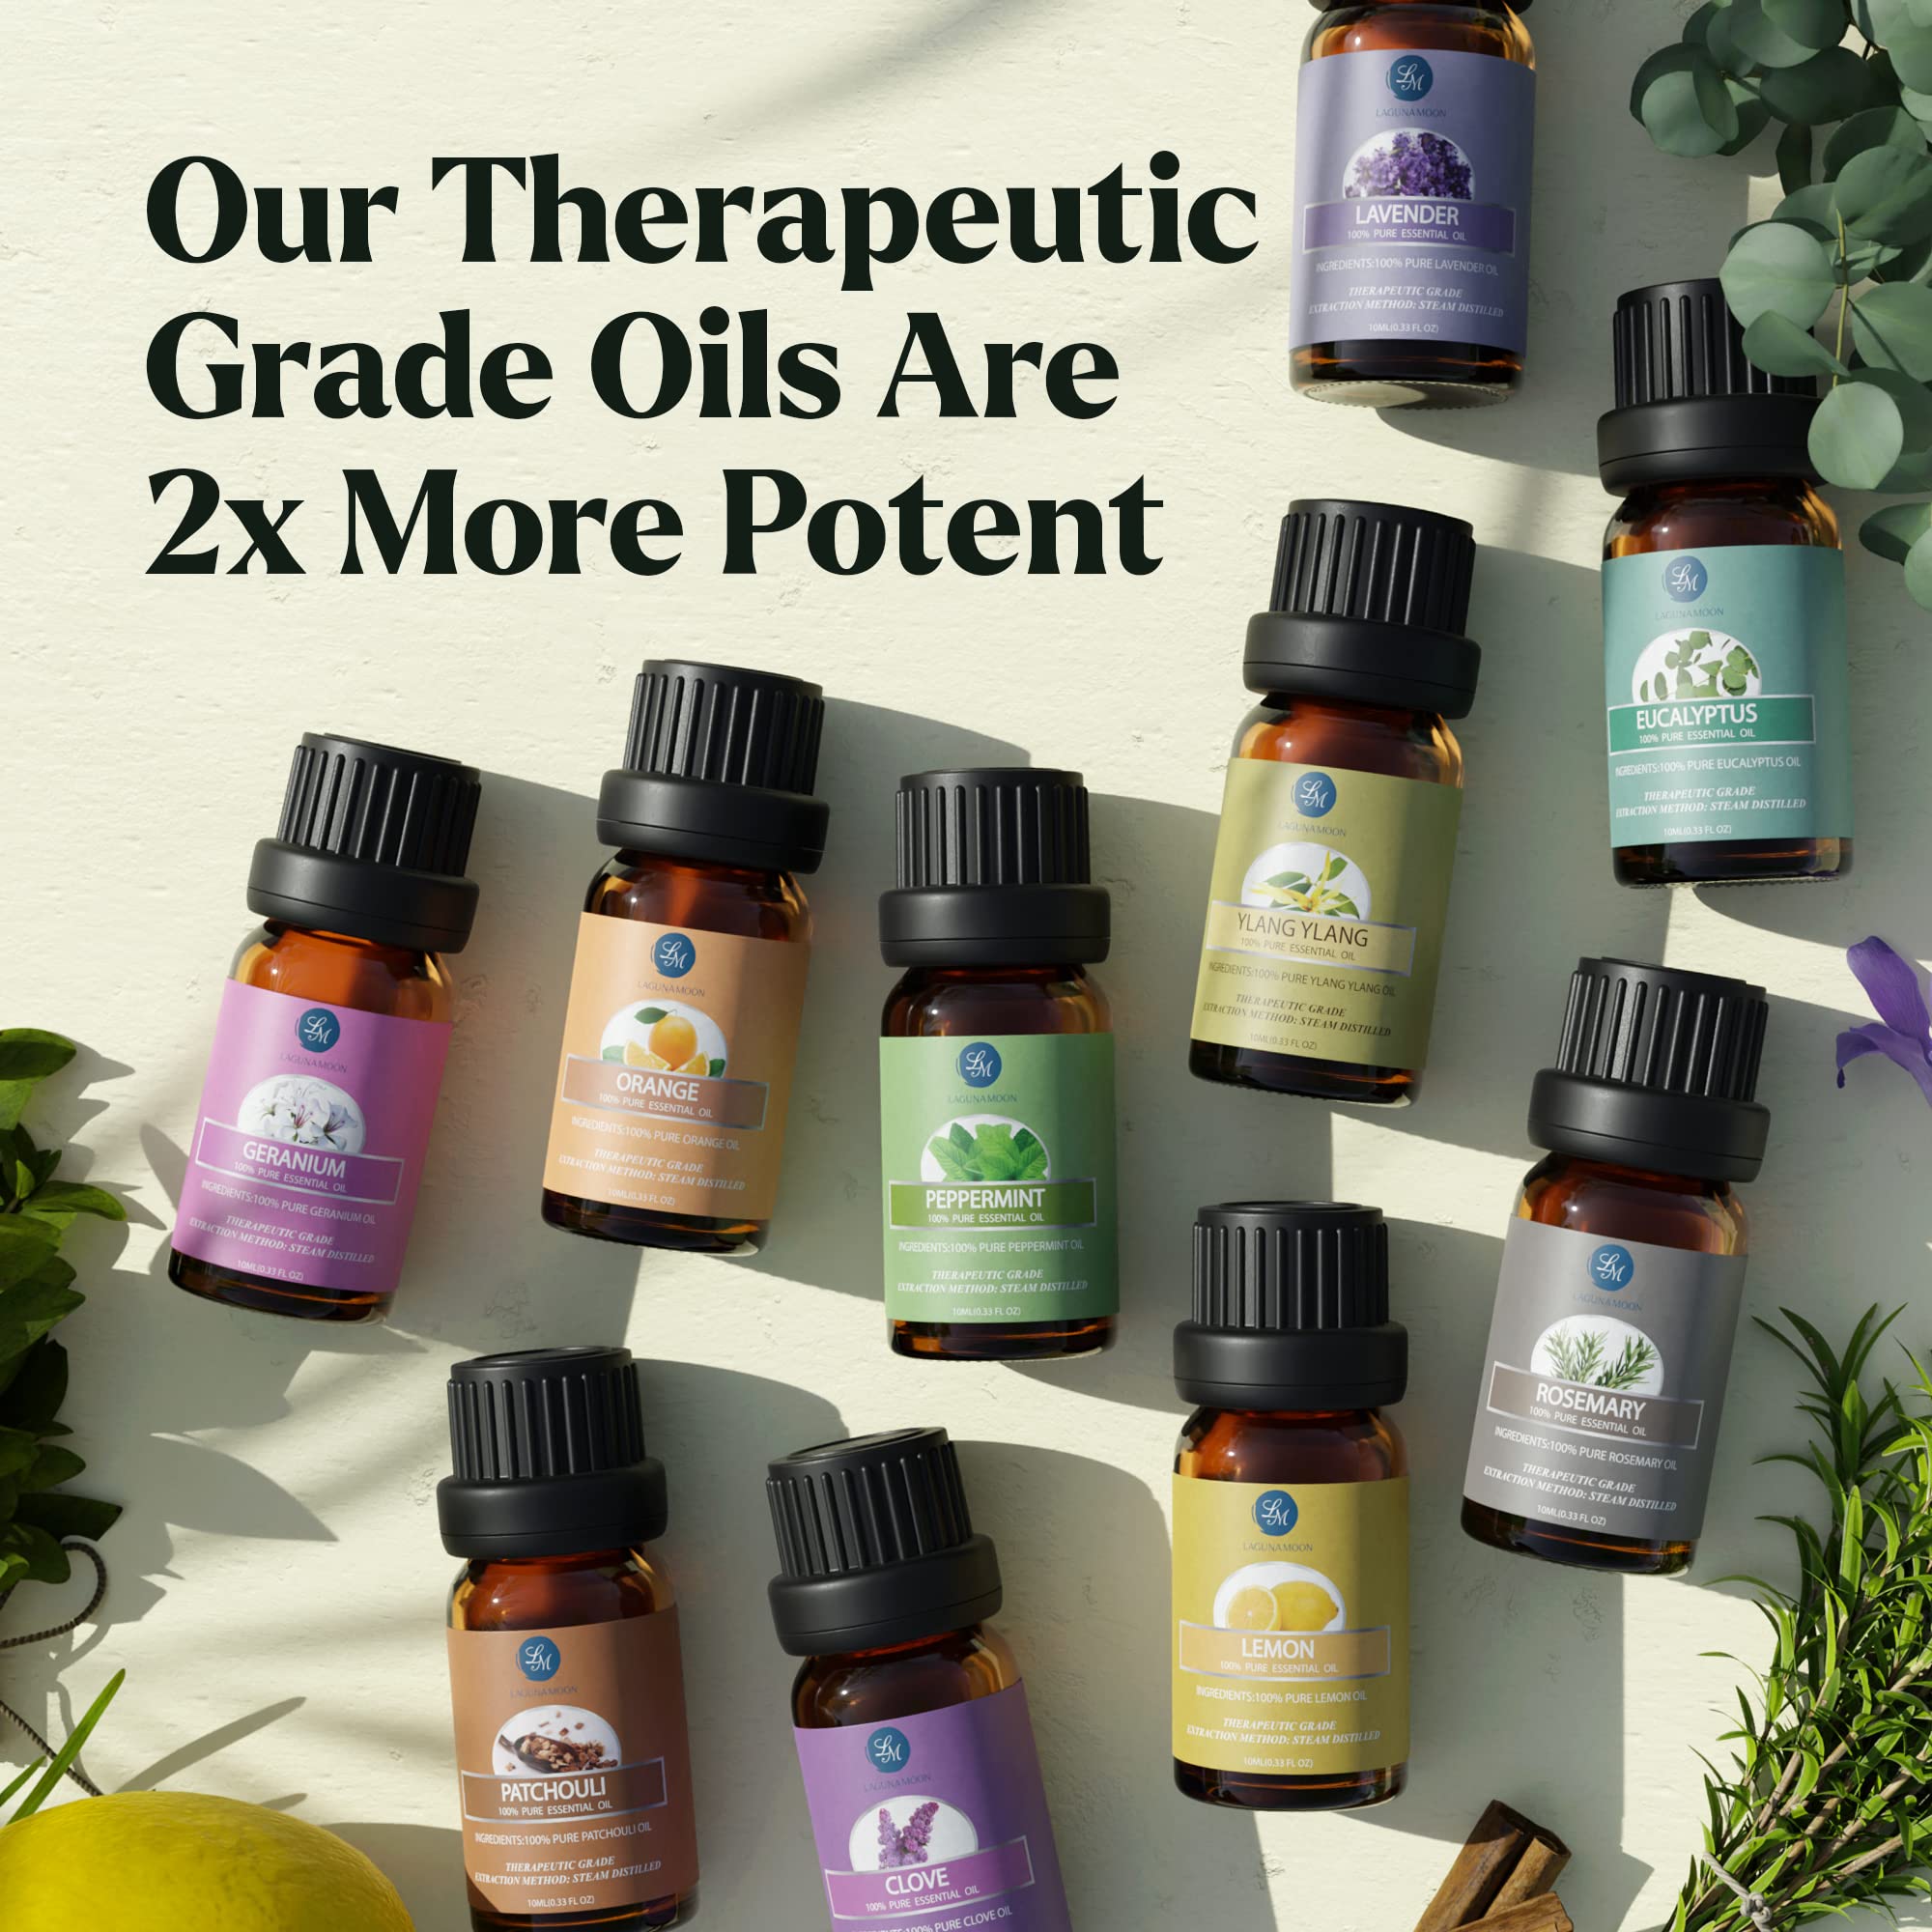 Essential Oils Set - Top 10 Organic Therapeutic-Grade Gift Set Blends for Fragrance, Diffusers, Humidifiers, Aromatherapy, Massages, Office, Soap Scents, Candle Making, Slime - Skin & Hair (10mL)